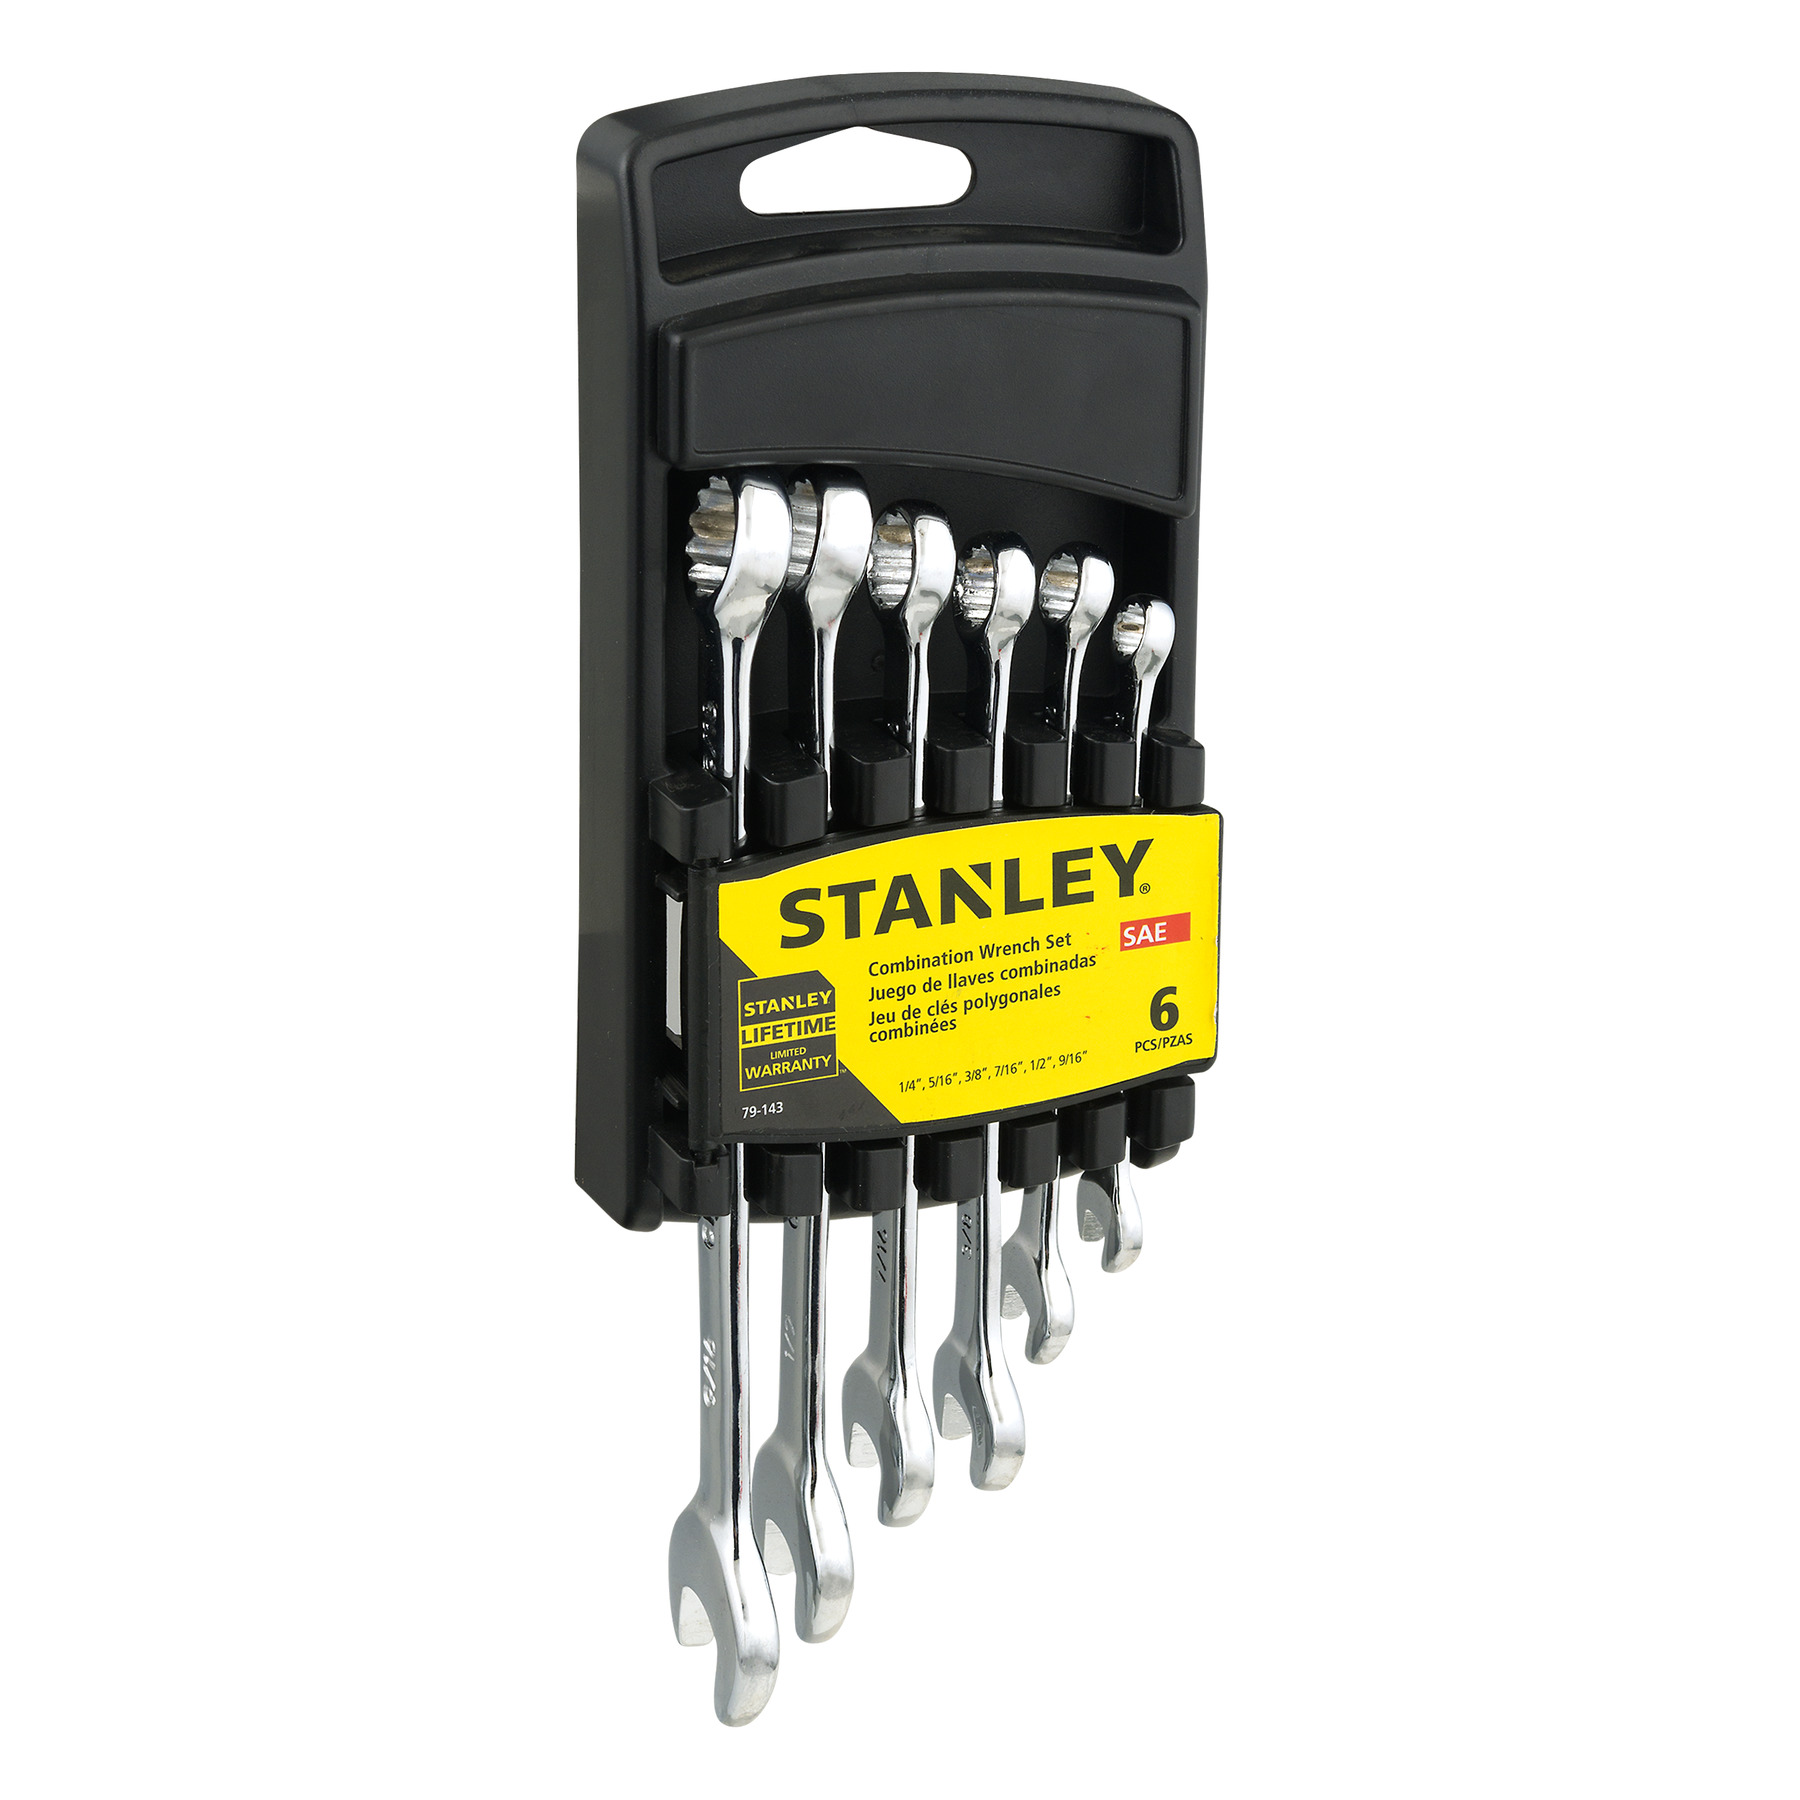 Stanley Combination Wrench Set - 6 PC, 6.0 PIECE(S) - image 2 of 5